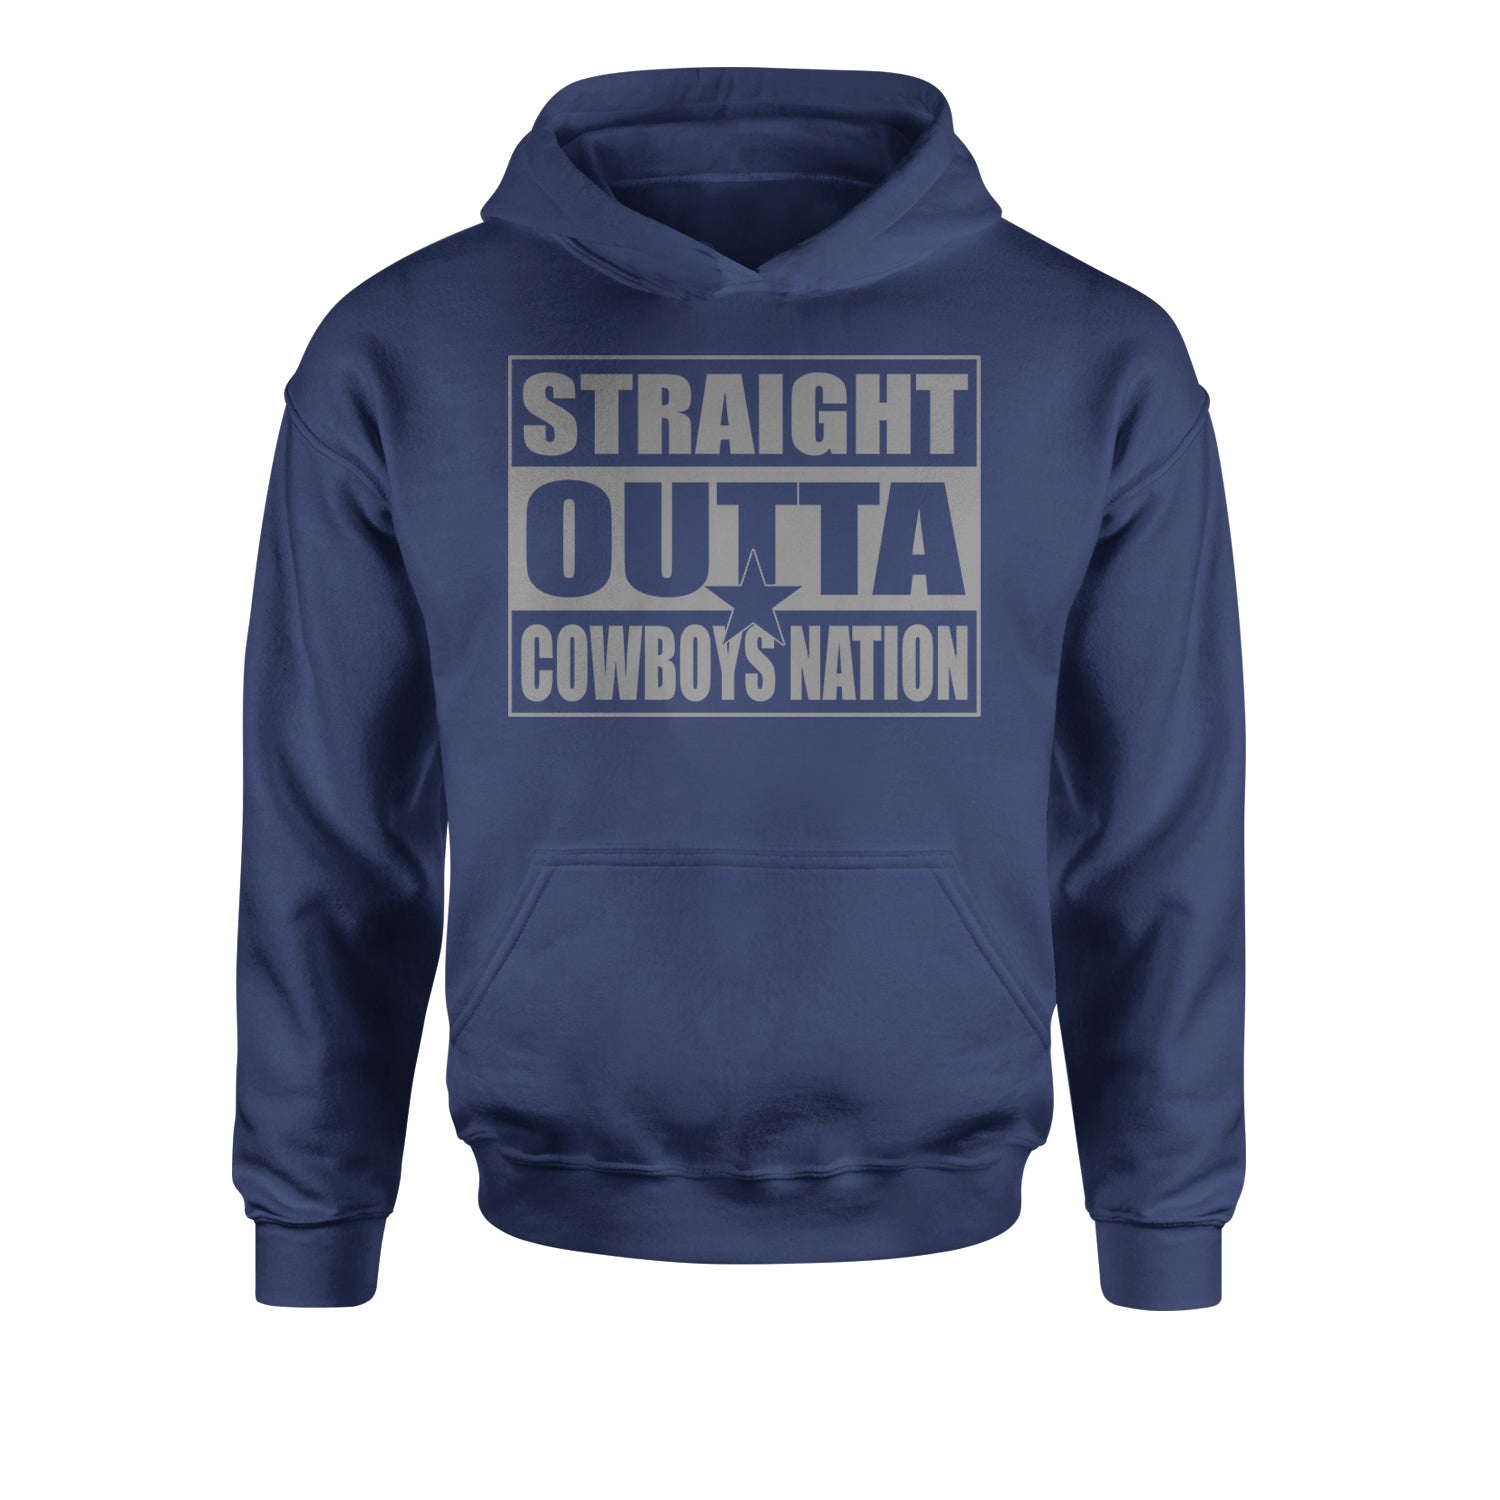 Straight Outta Cowboys Nation   Youth-Sized Hoodie